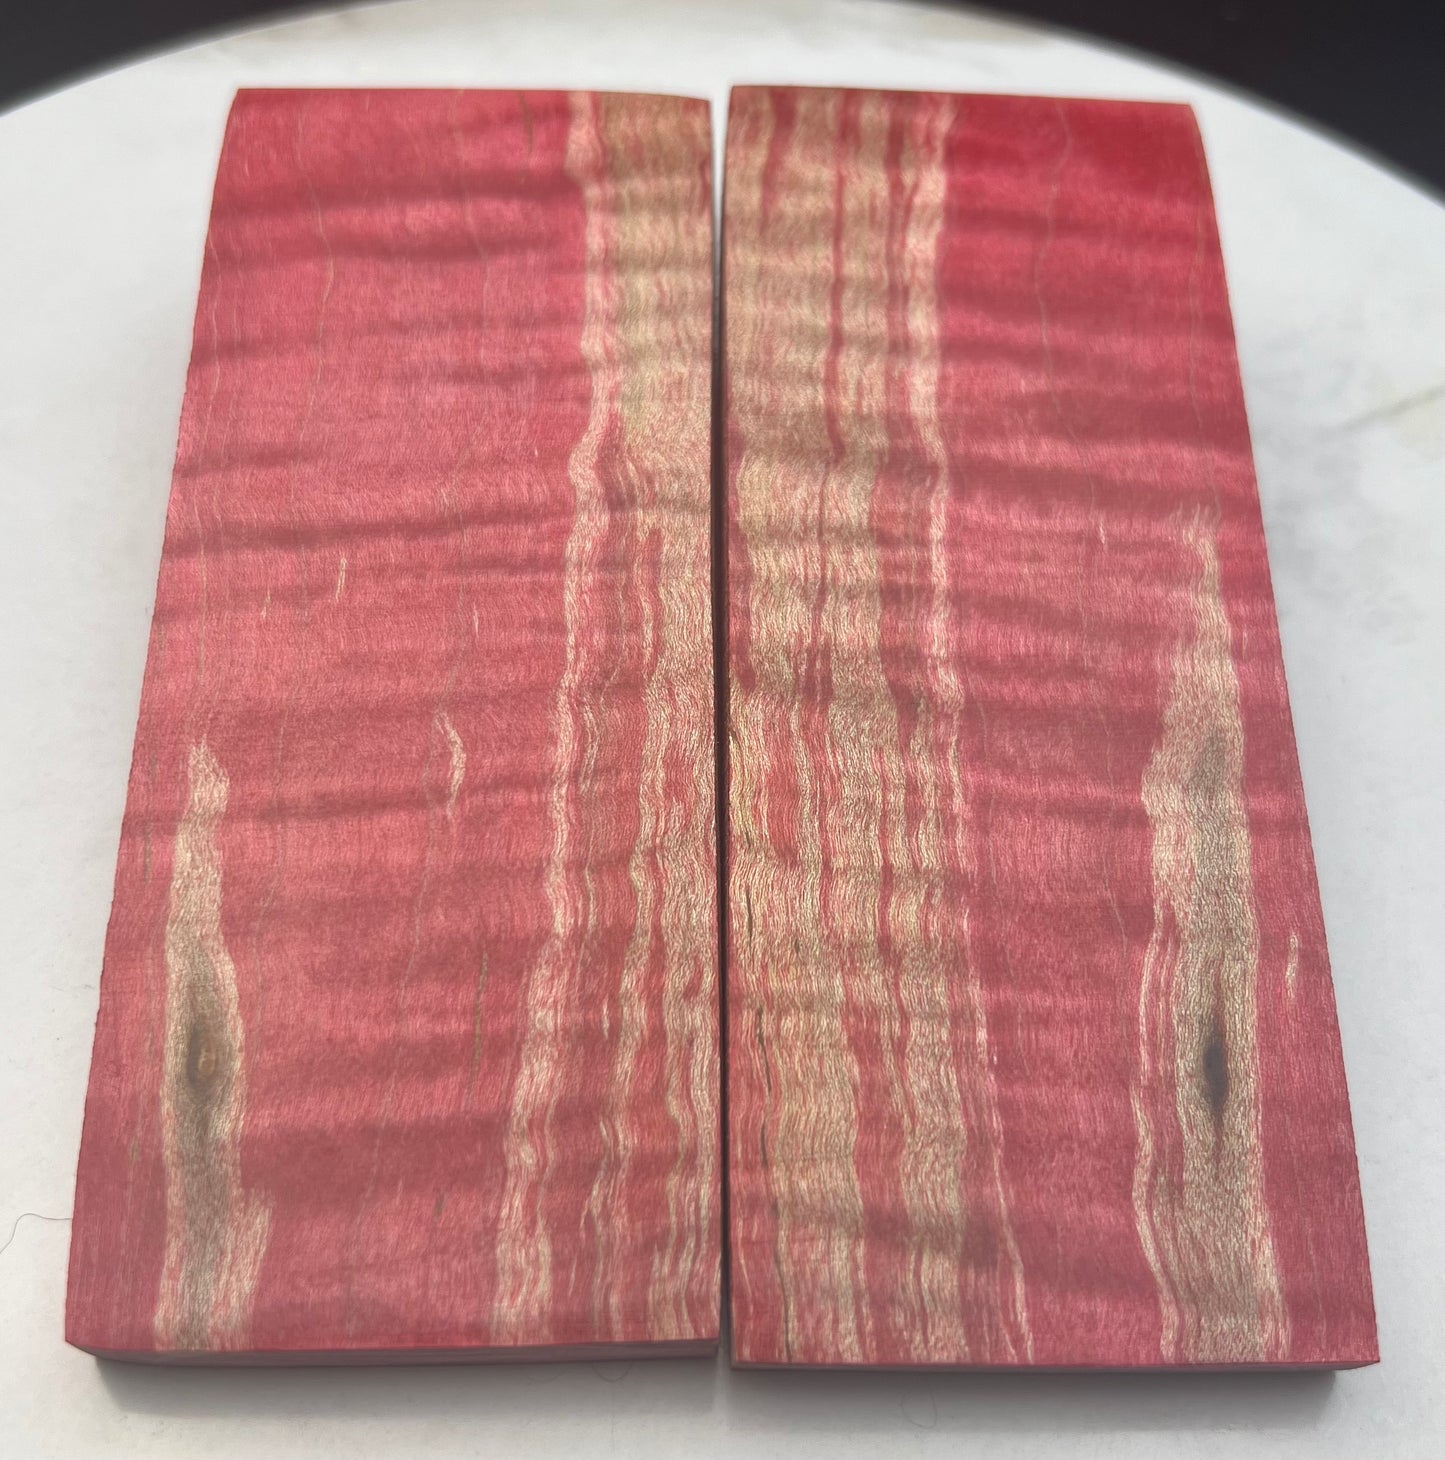 Stabilized Curly Maple knife Scales Light Red/ Pink